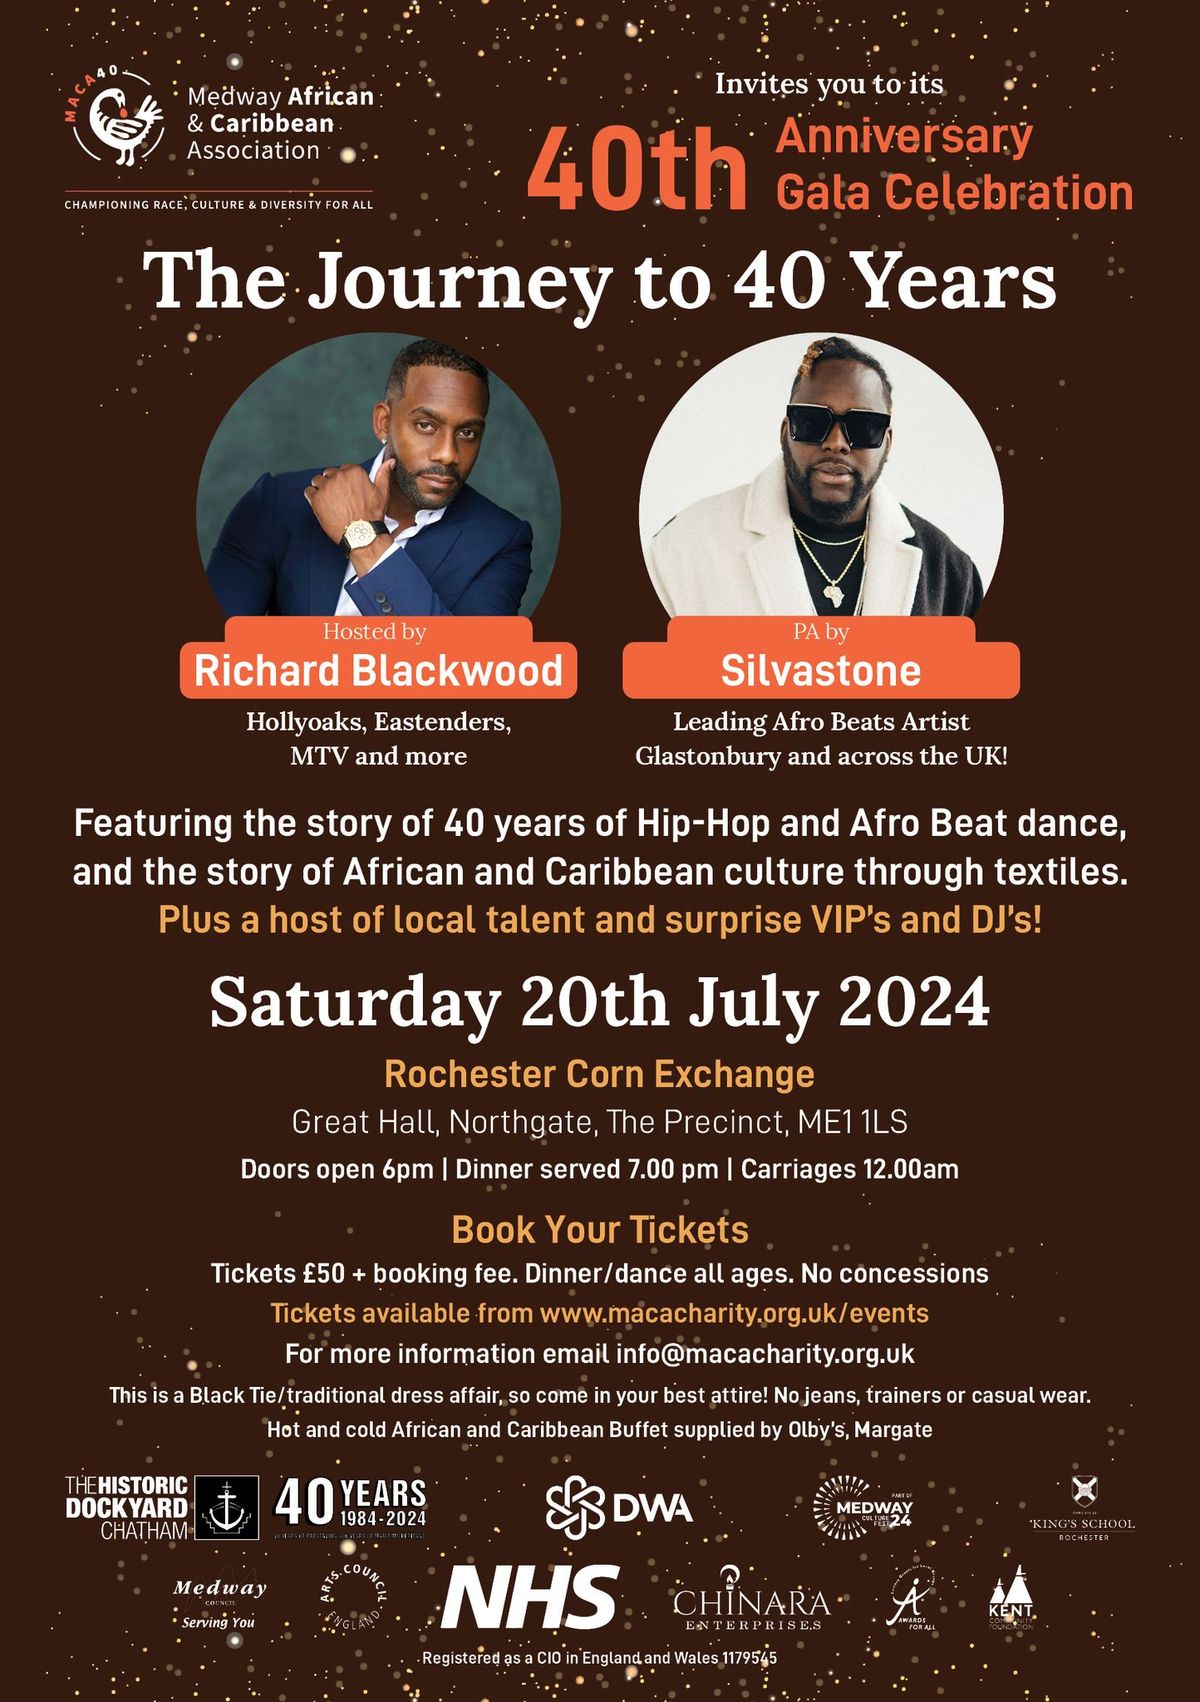 Medway African and Caribbean Association 40th anniversary gala